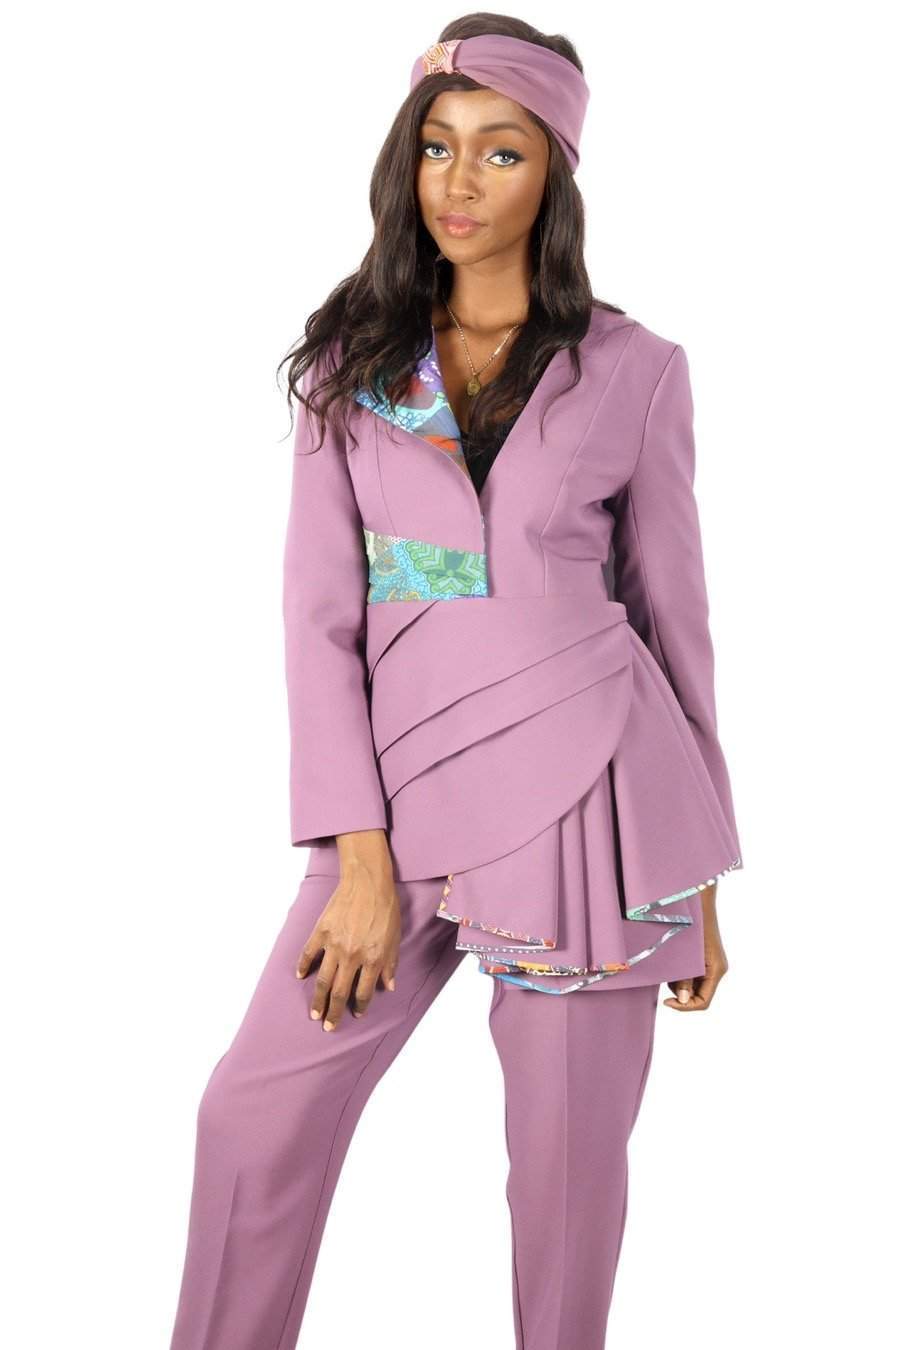 African Patched stylish suit-danddclothing-AFRICAN WEAR FOR WOMEN,Ladies Suits,Violet